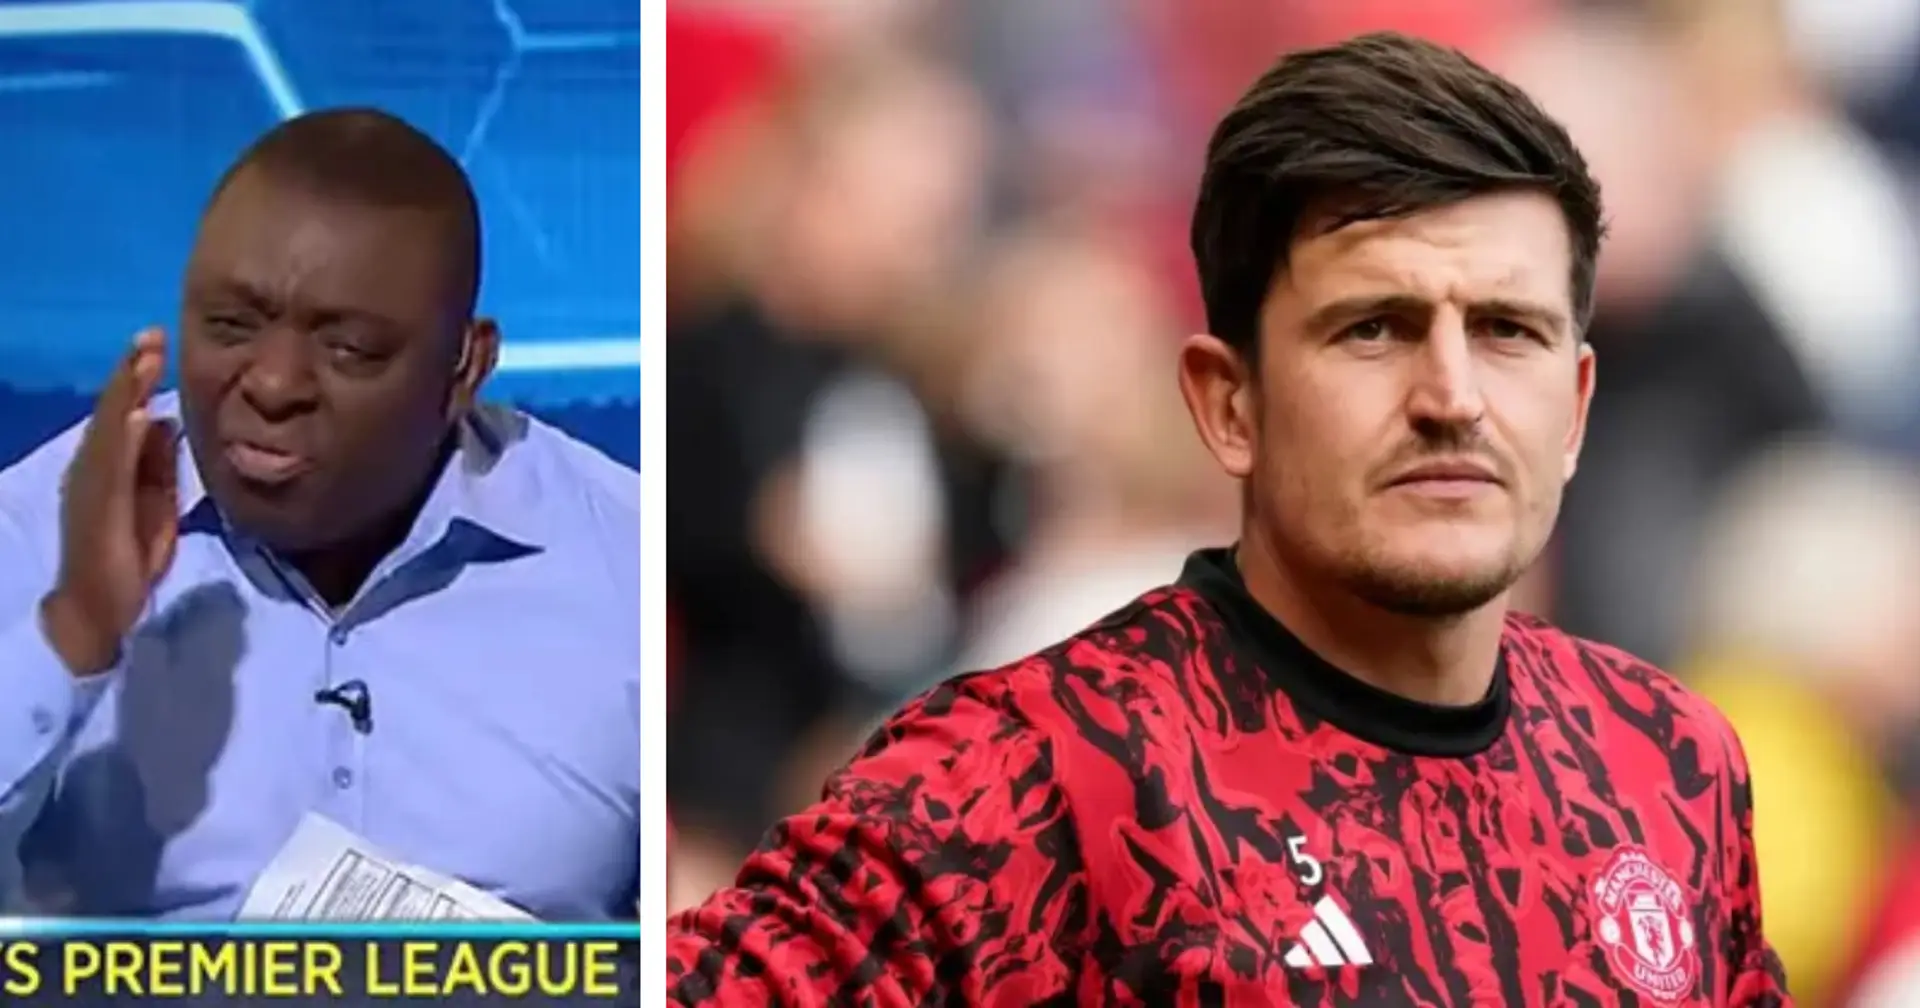 'Not even playing regular first-team football': Garth Crooks baffled by Maguire's England call-up